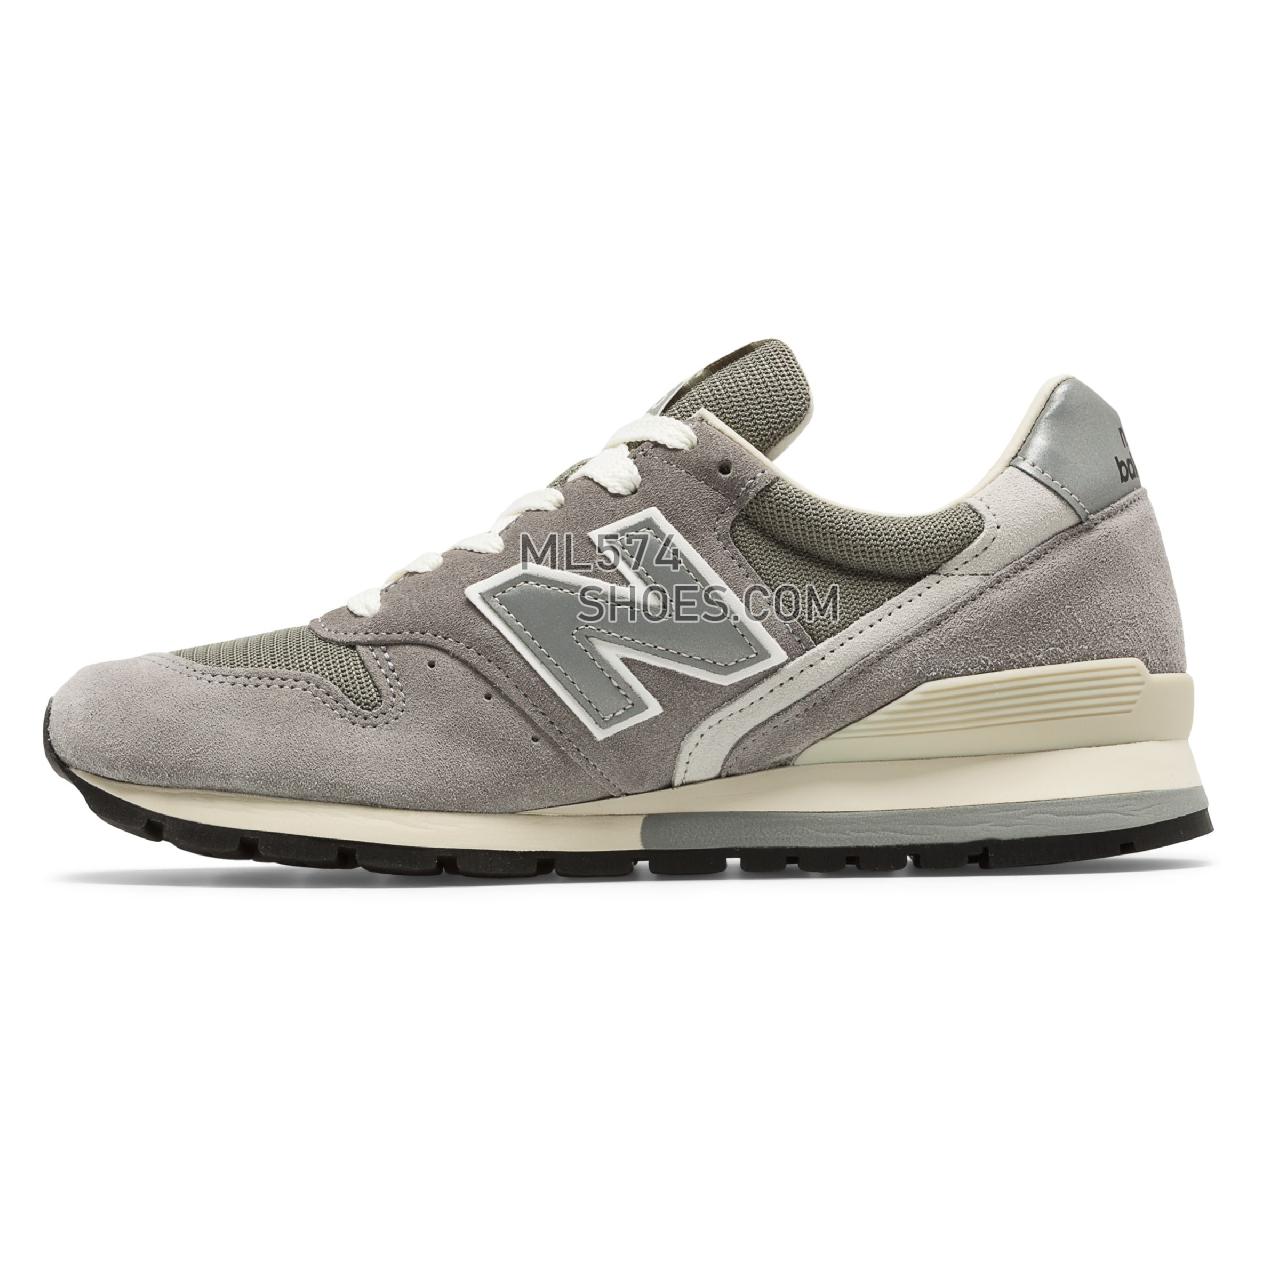 New Balance 996 Made in US - Men's 996 - Classic Grey with White - ML996DK